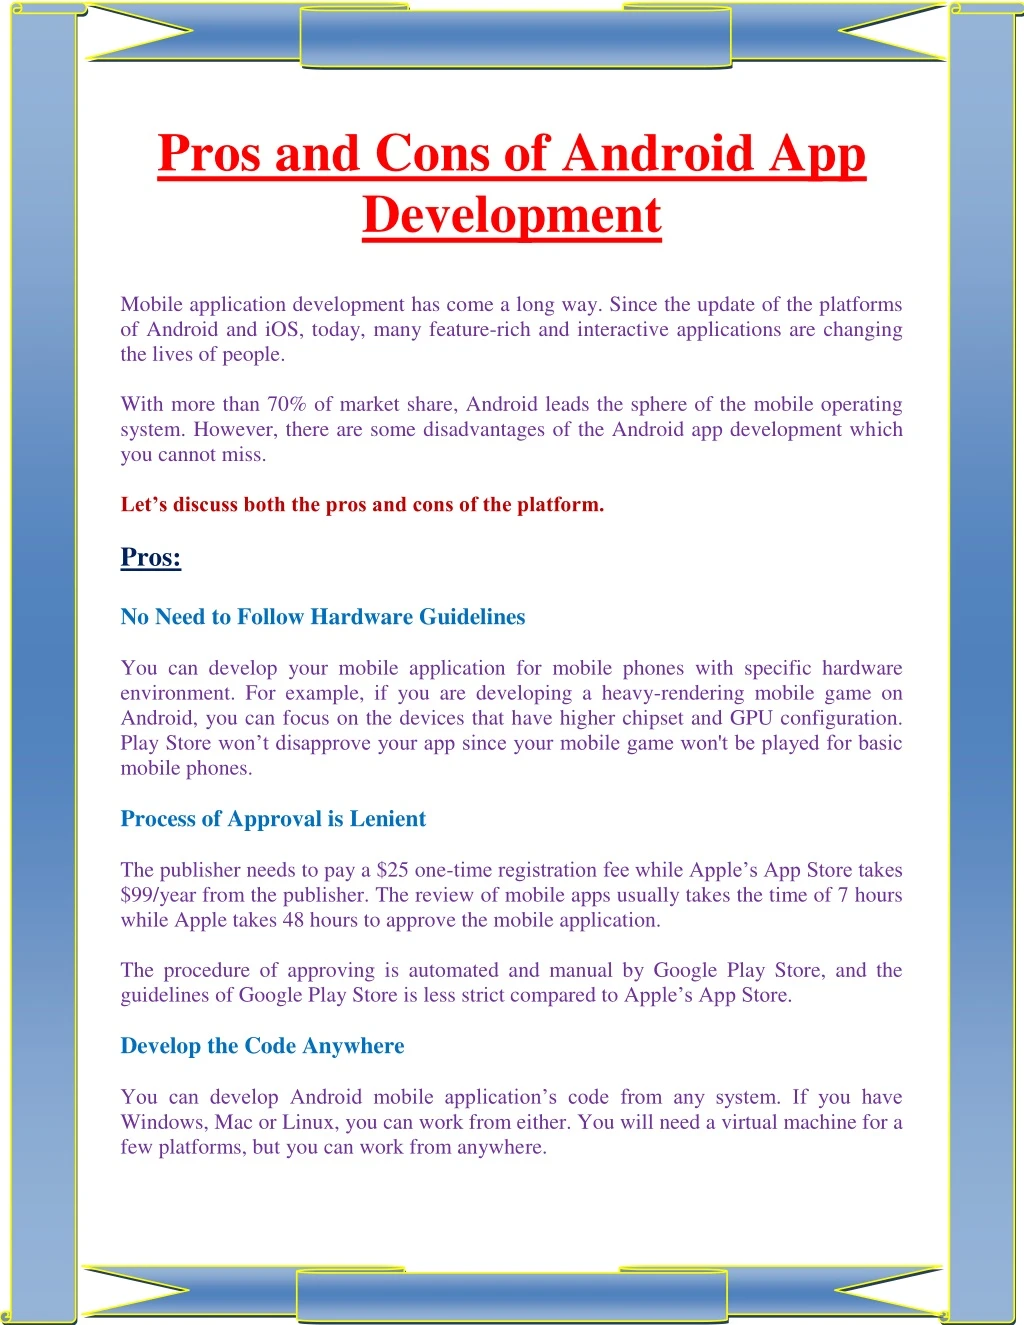 pros and cons of android app development